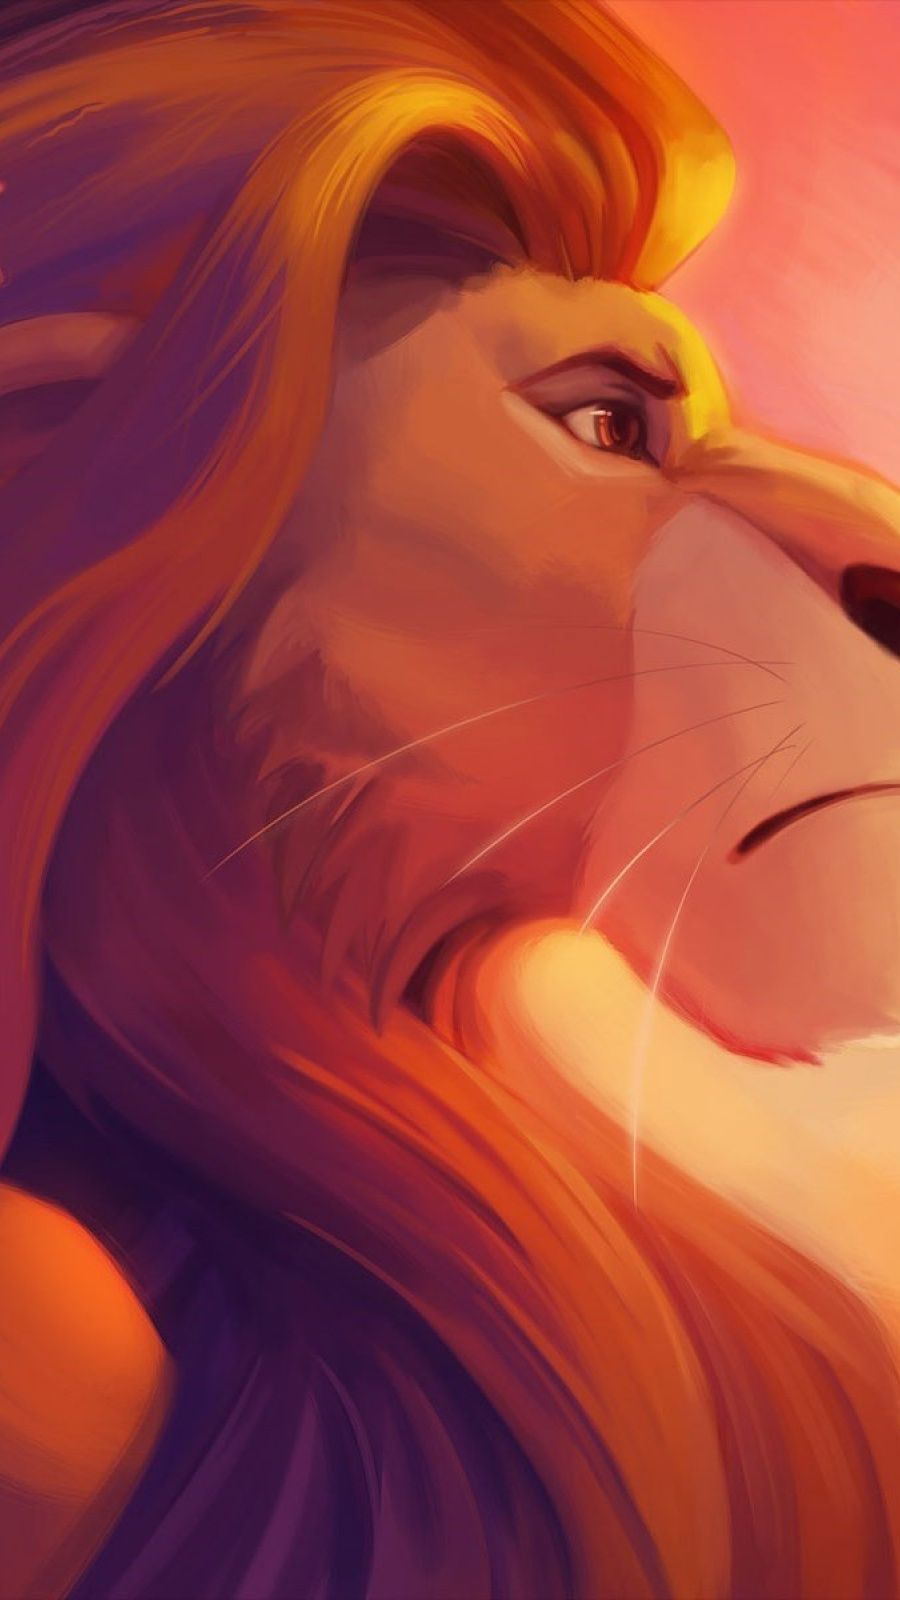 Lion King iPhone Wallpapers  Top Free Lion King iPhone Backgrounds   WallpaperAccess